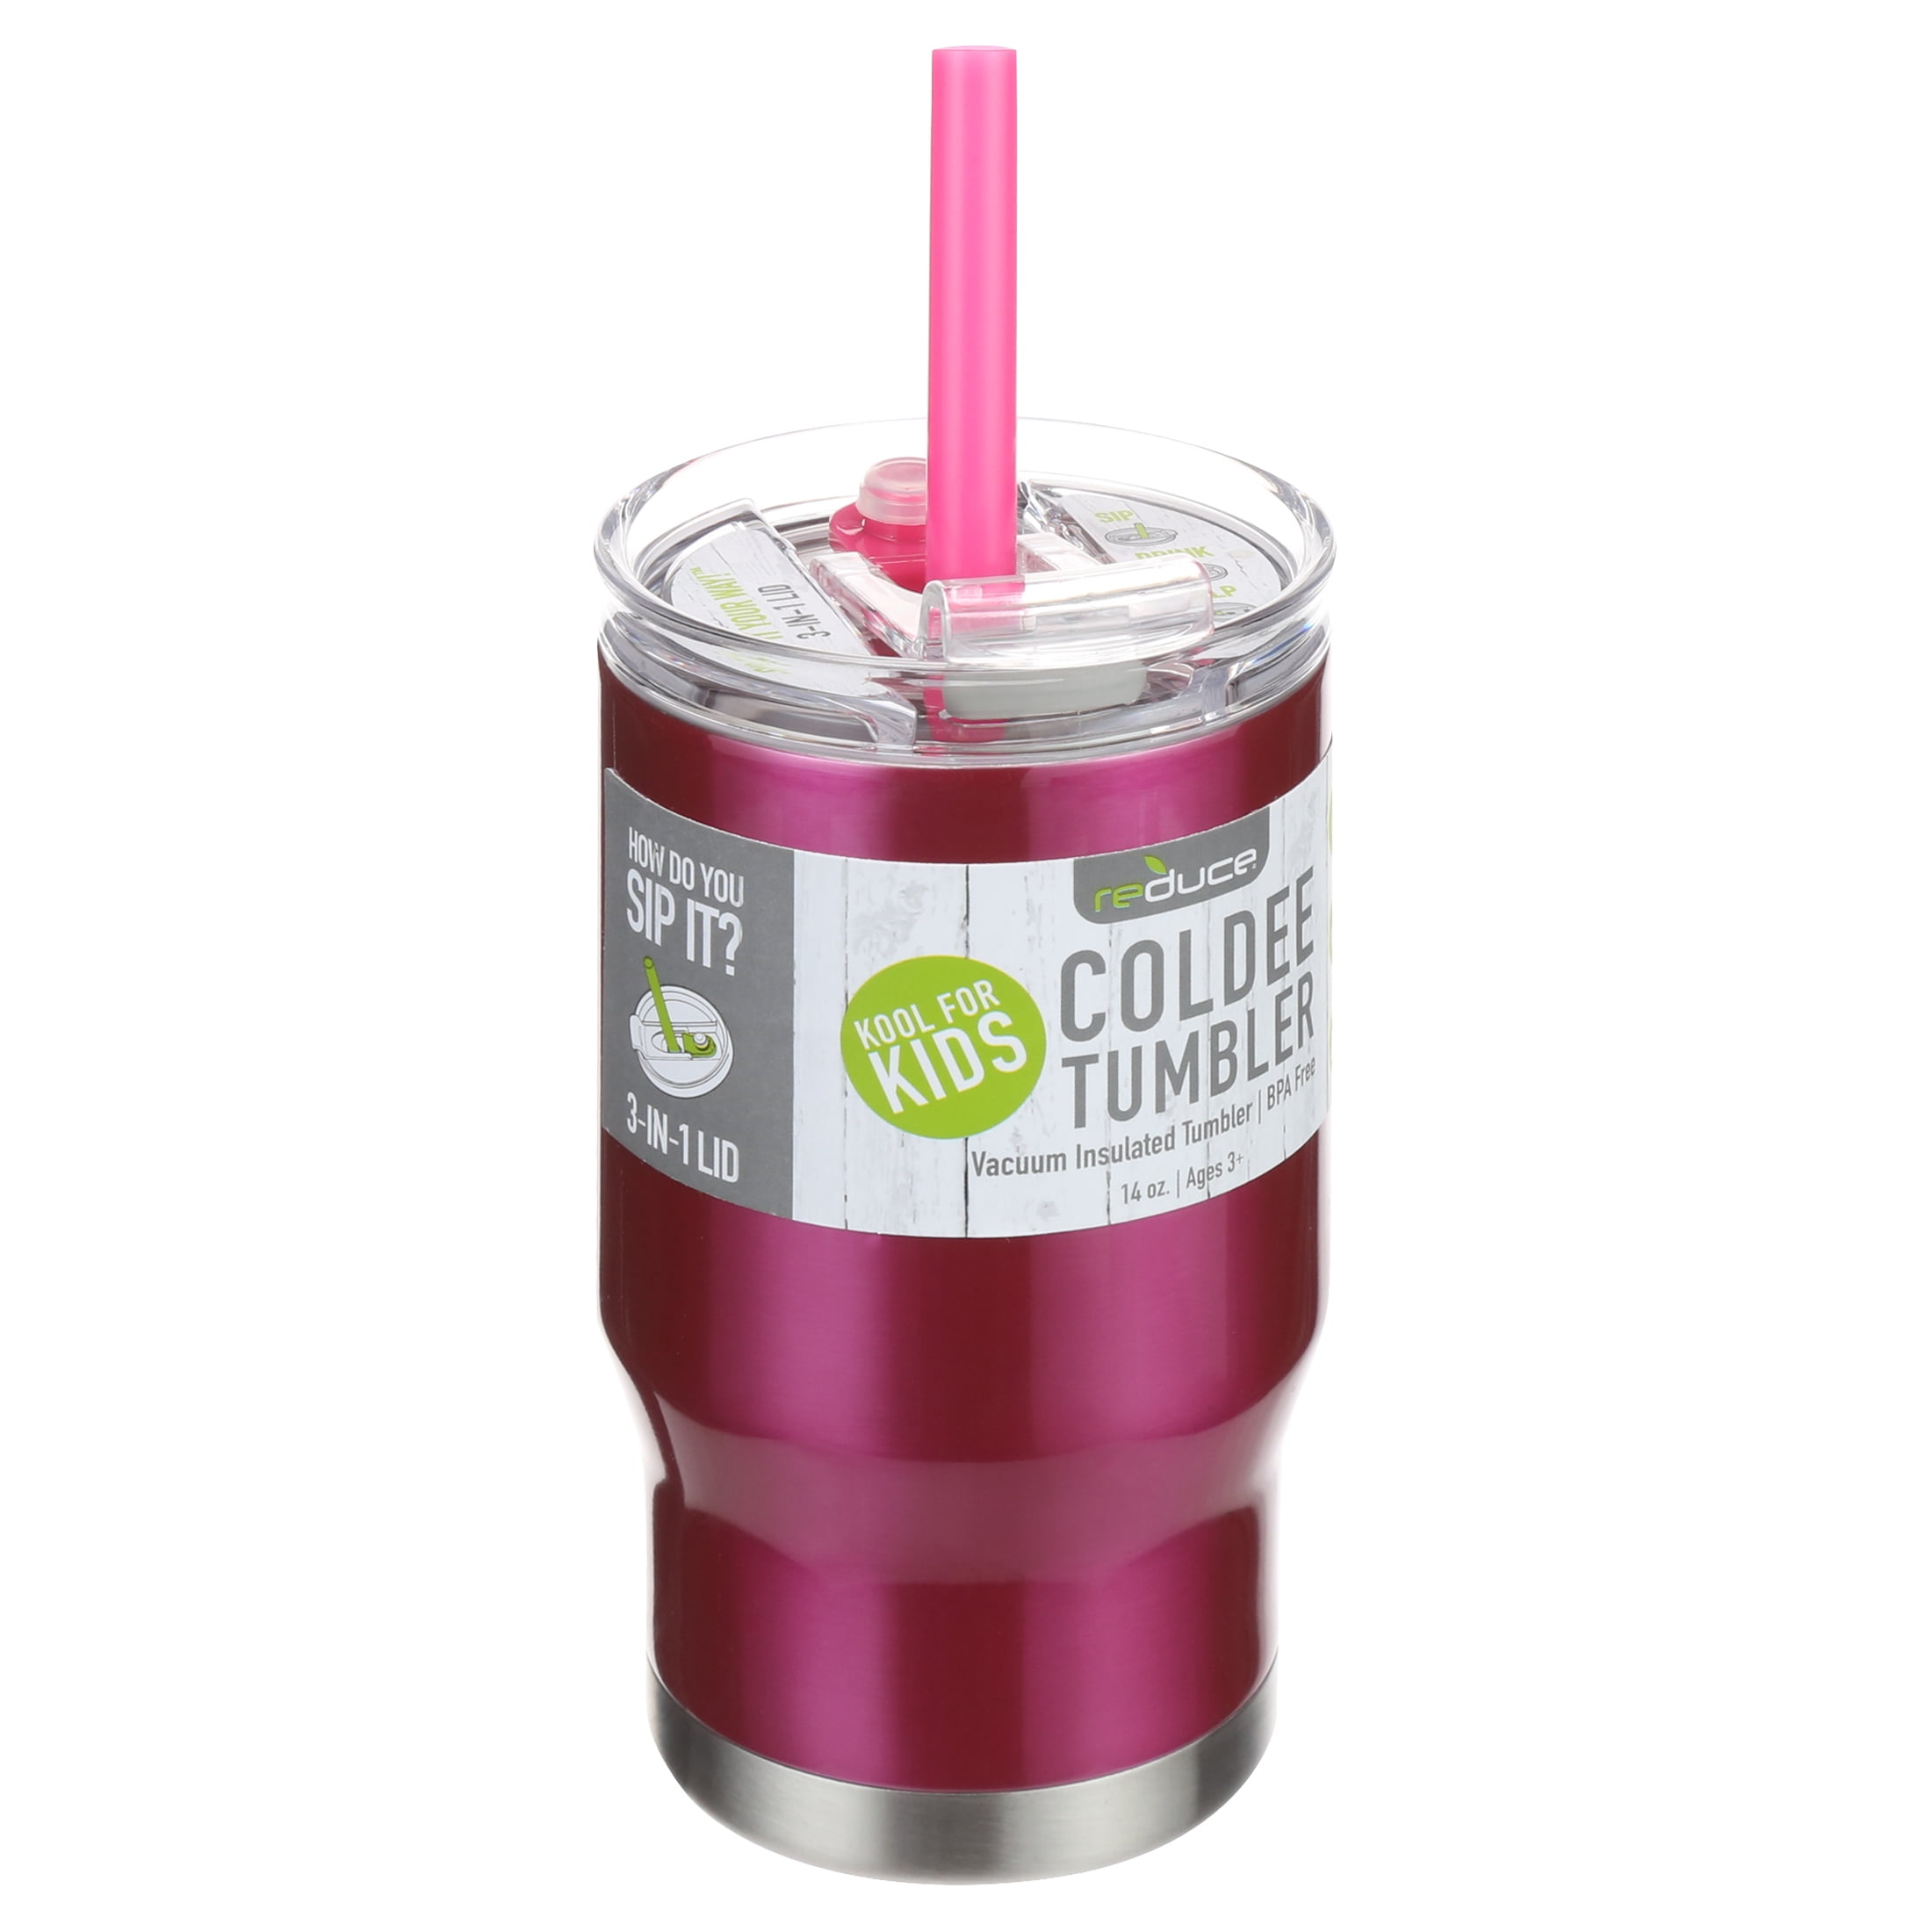 Reduce Tumbler Lid and Straw Set for Coldee 14 oz Tumblers – BPA Free,  Dishwasher Safe, Impact Resistant – Replace Broken, Damaged or Lost Coldee  14